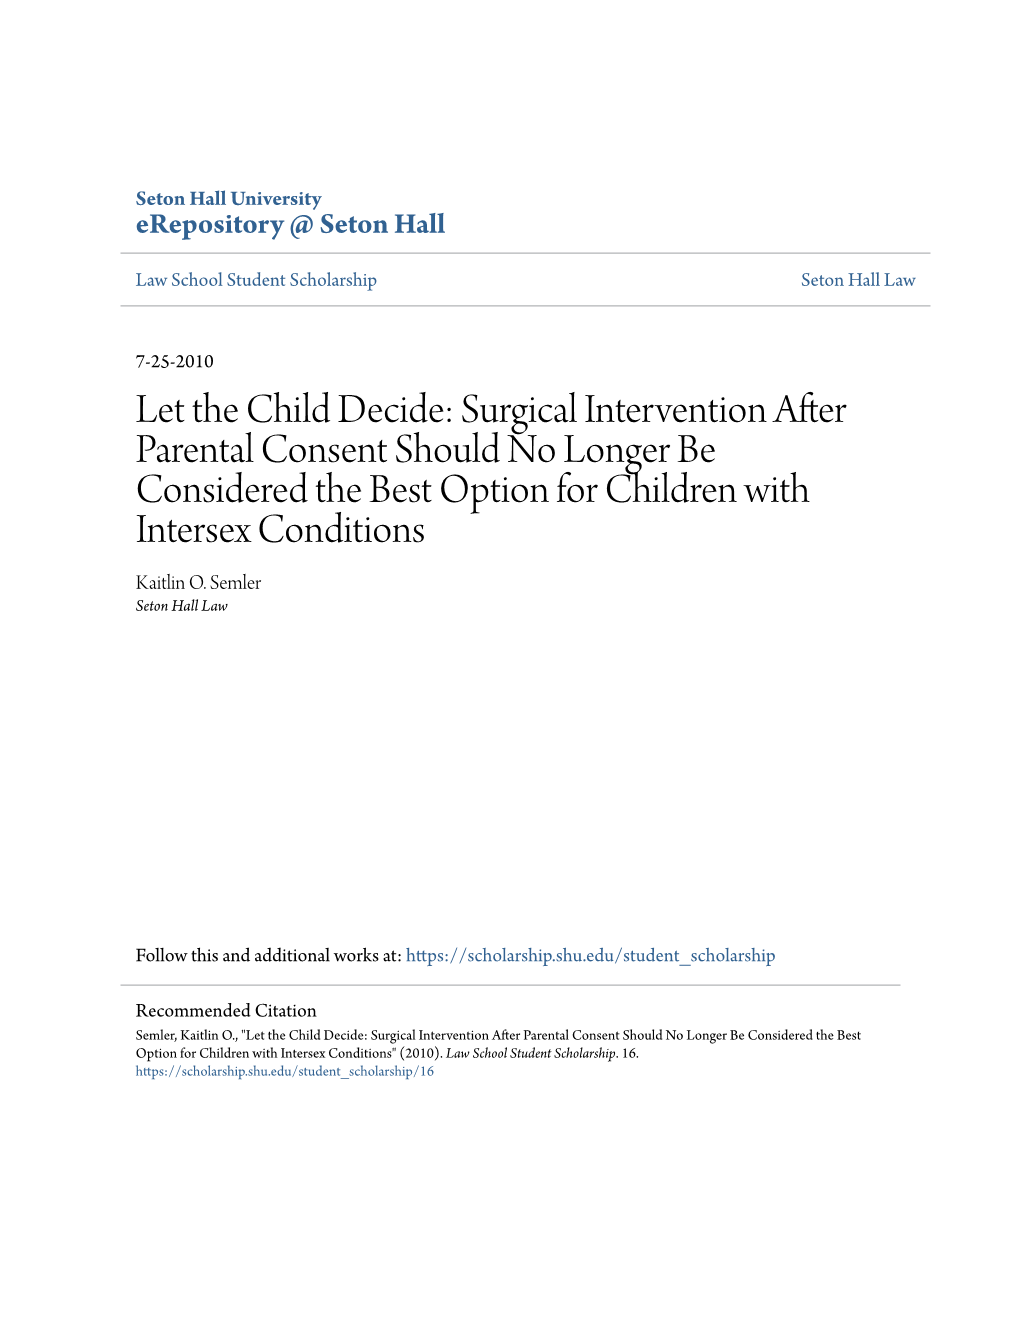 Let the Child Decide: Surgical Intervention After Parental Consent Should No Longer Be Considered the Best Option for Children with Intersex Conditions Kaitlin O